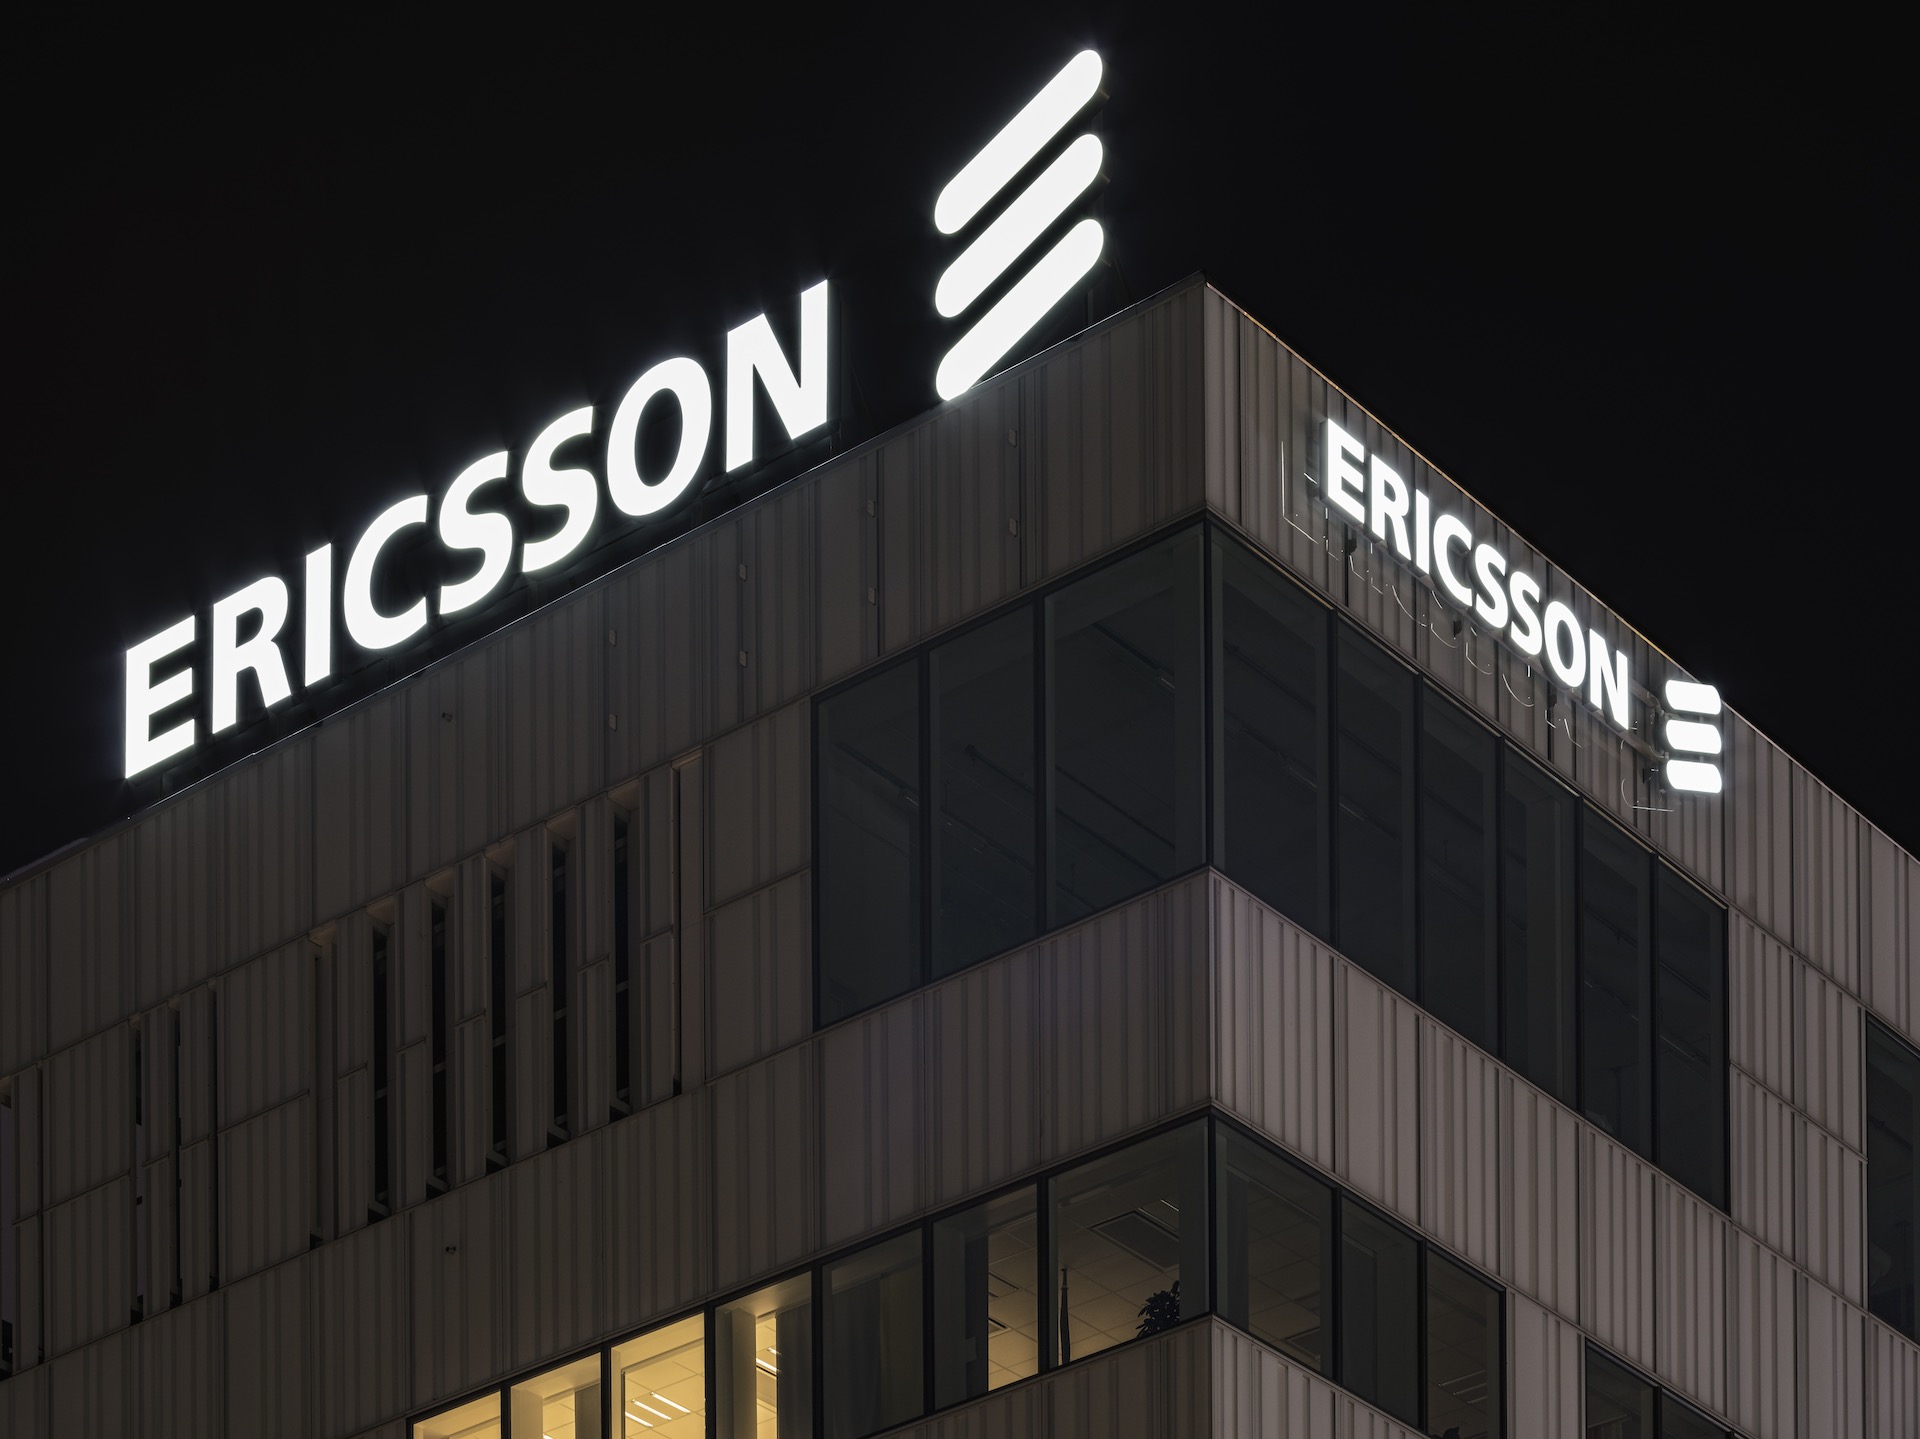 Ericsson's Iraq employees, vendors, and suppliers in violation of business ethics